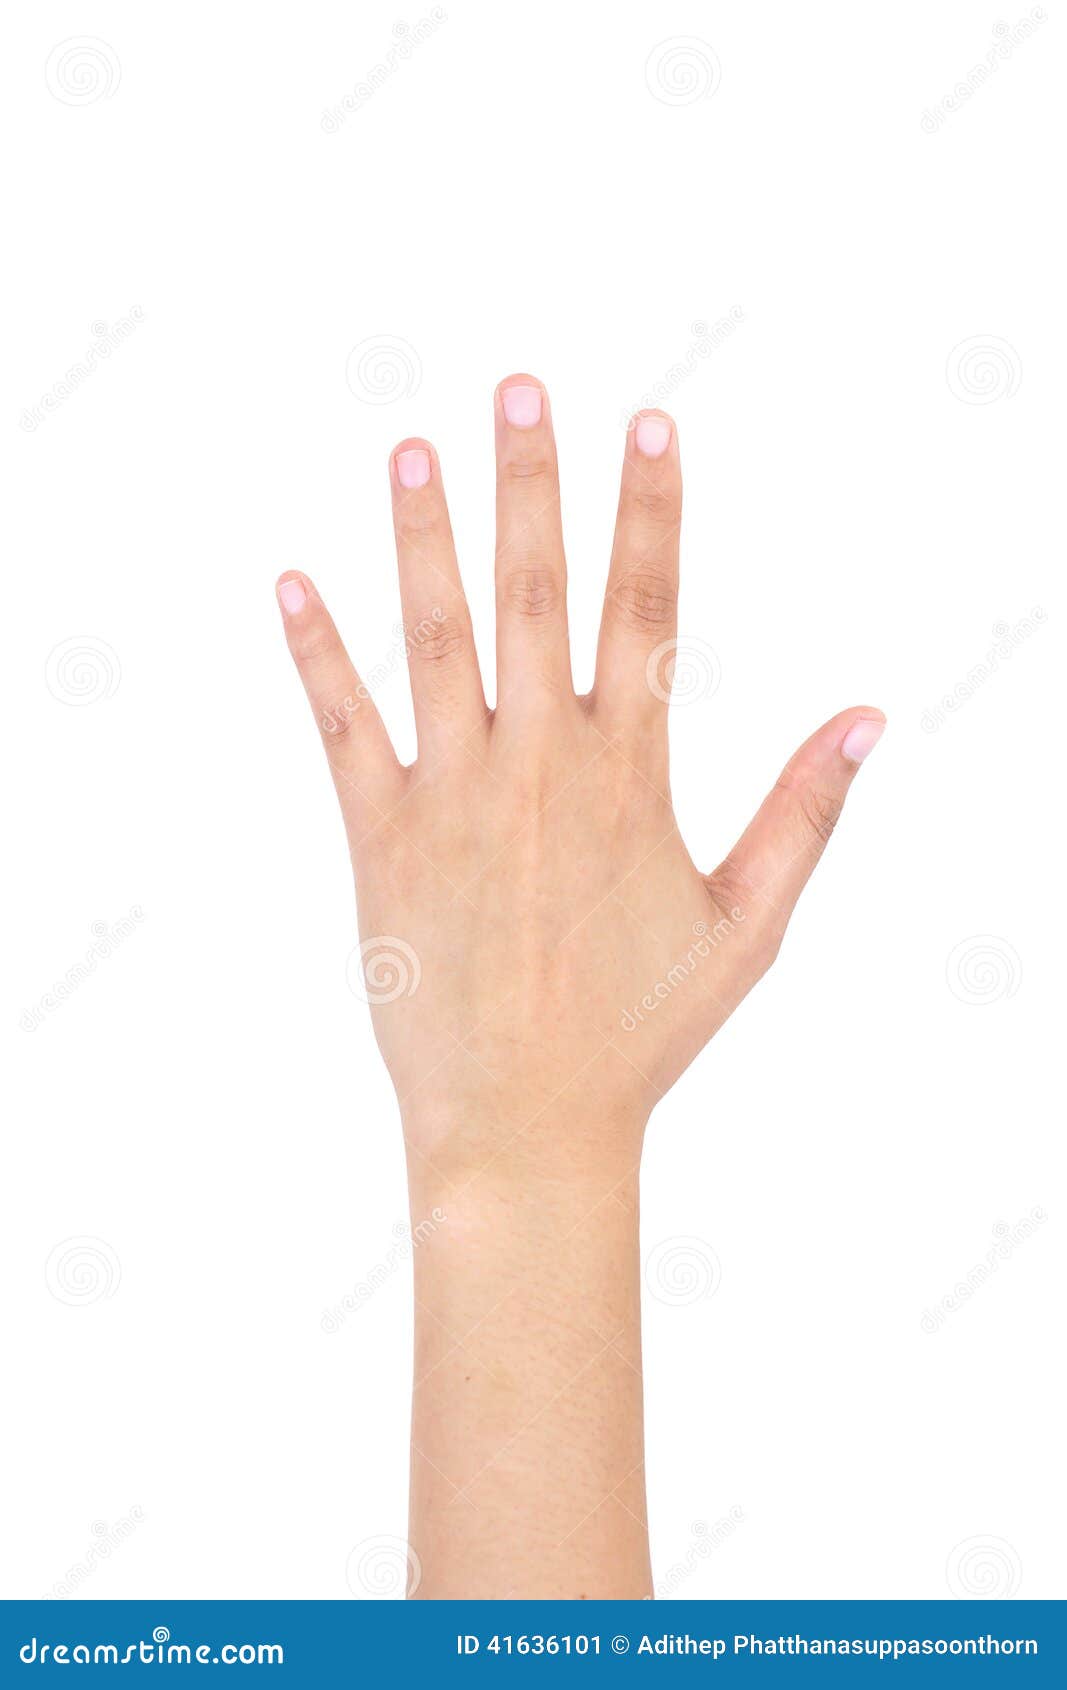 woman left hand showing the five fingers.